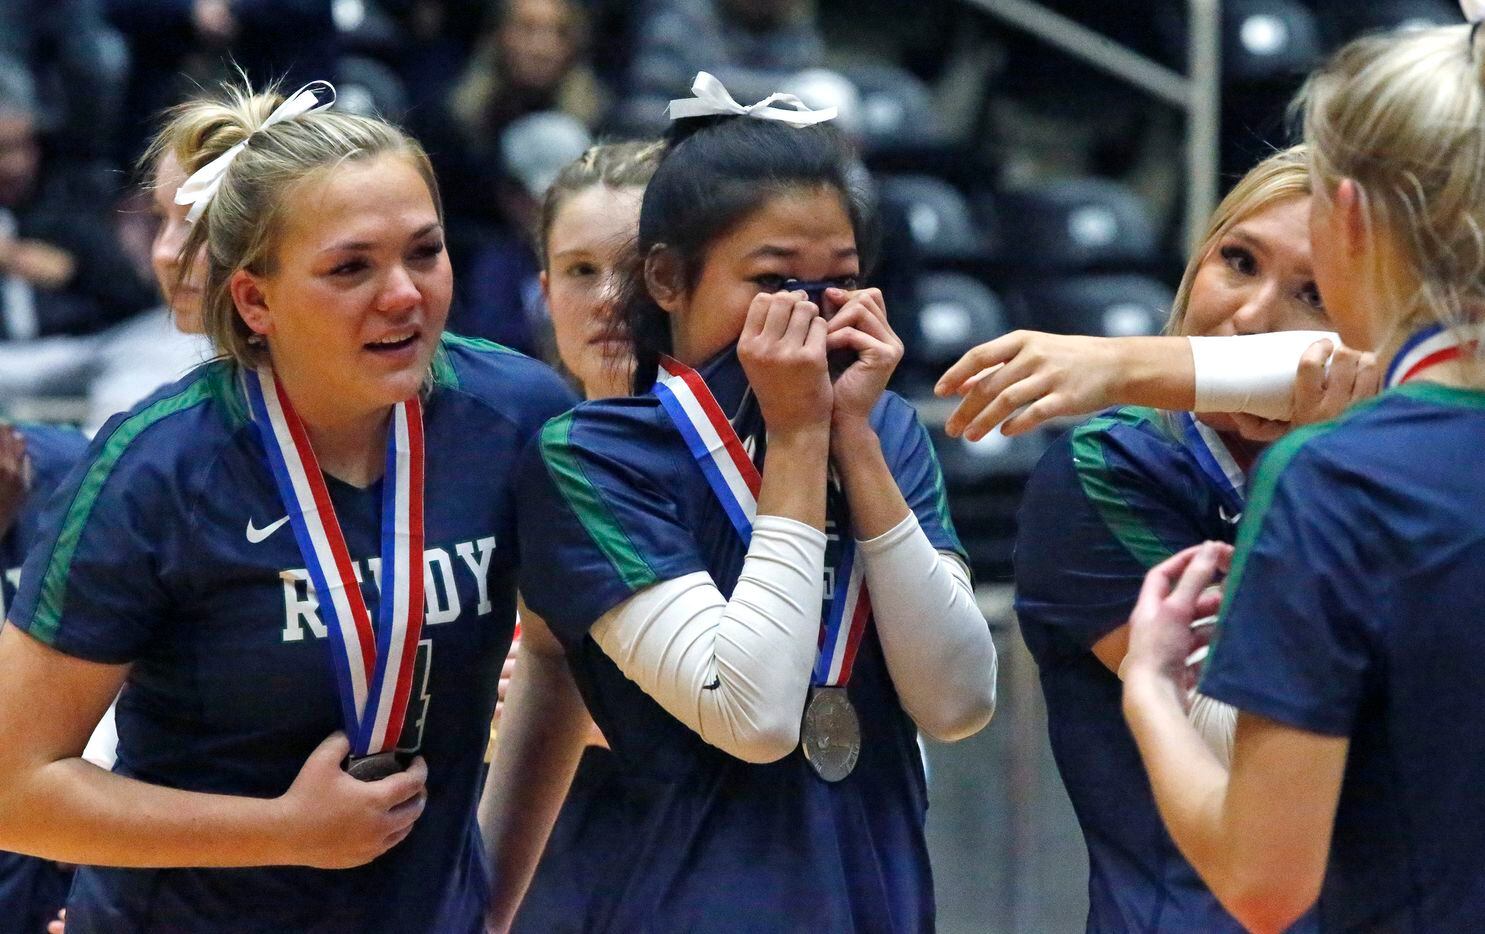 Reedy High School's Scout Ozawa (5) was emotional after losing the match as Colleyville...